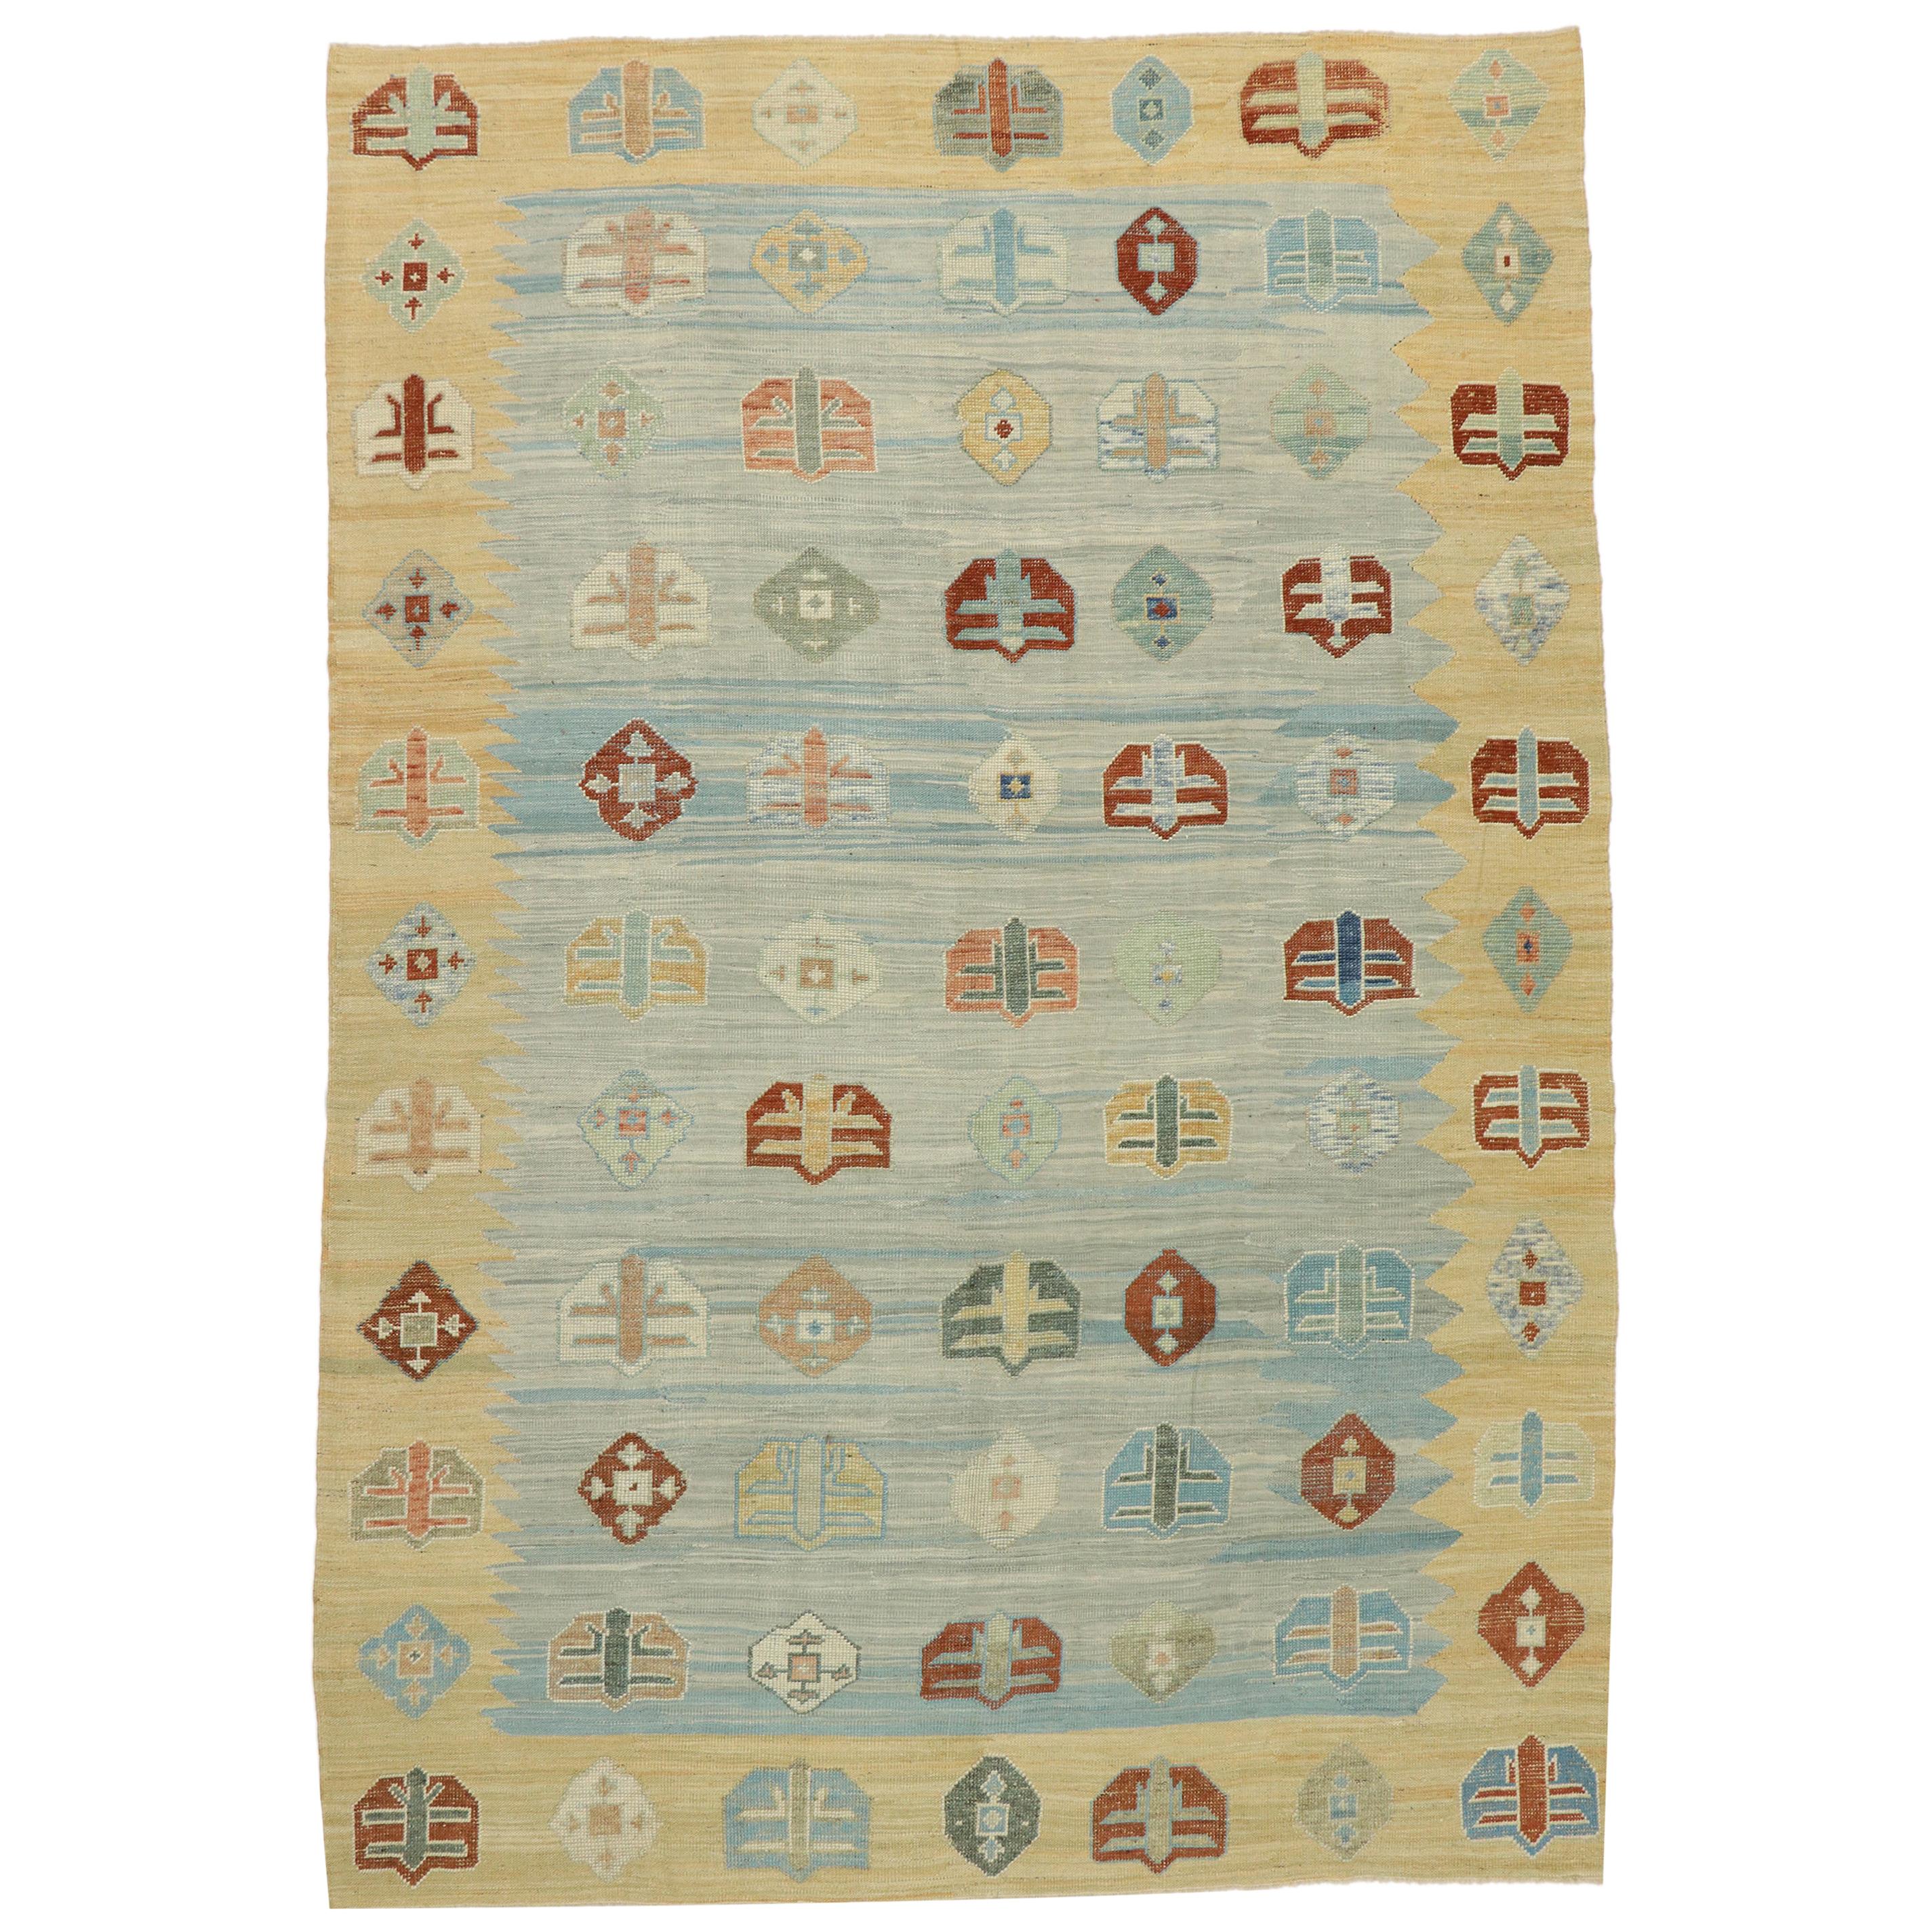 New Contemporary Turkish Kilim Souf Rug with Tribal Style, Flat-Weave Area Rug